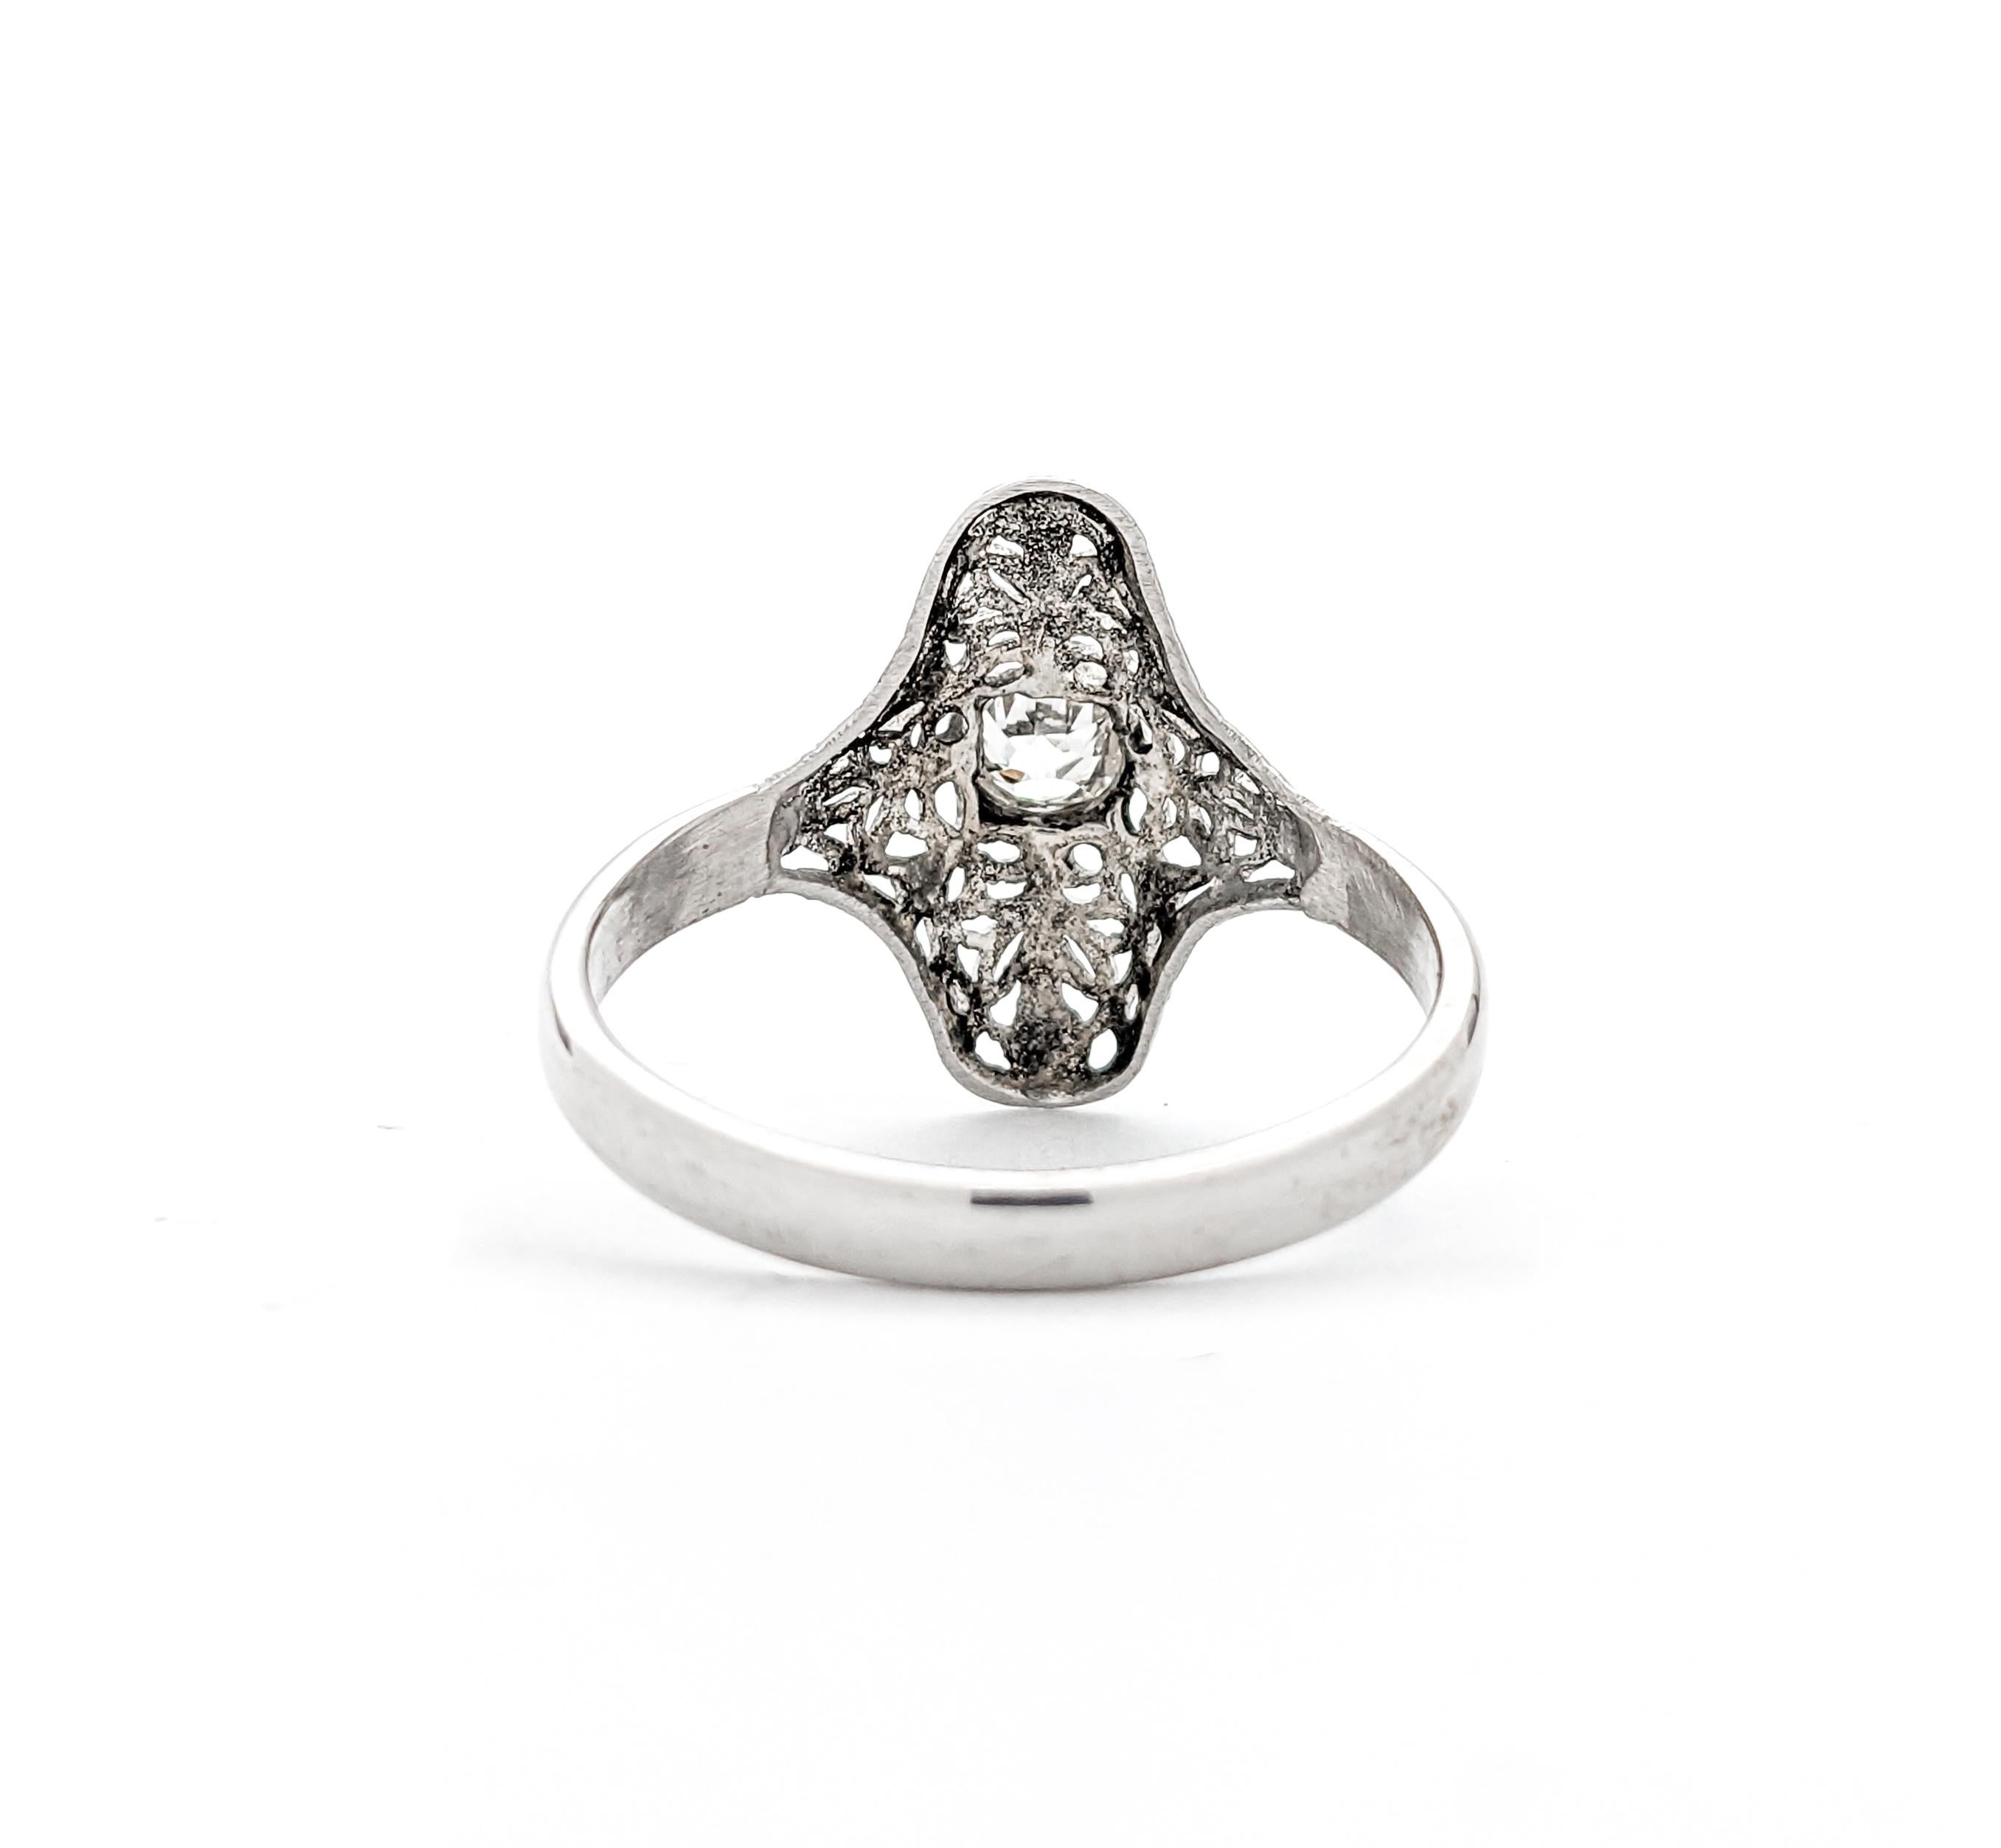 Antique Filigree Diamond Ring Art Deco Style Ring In White Gold For Sale 5